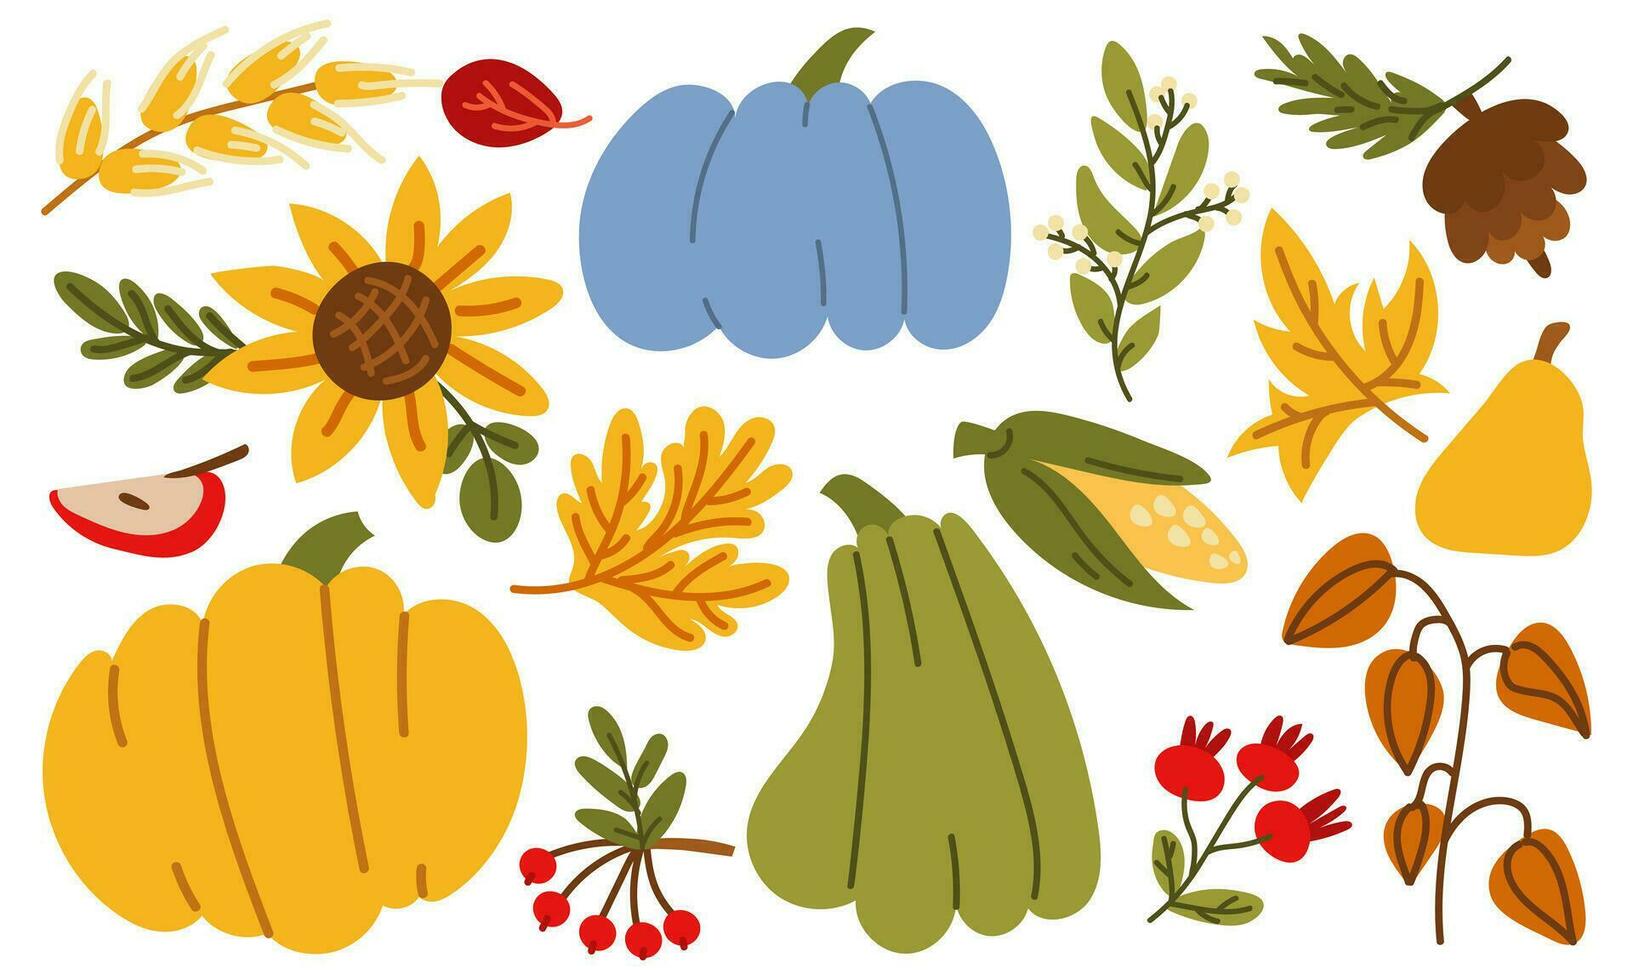 The autumn harvest has begun. Vector collection of vegetables, fruits and berries of the farm with pumpkins, sunflowers, apples, corn, pears, physalis, cranberries. Funny autumn illustration